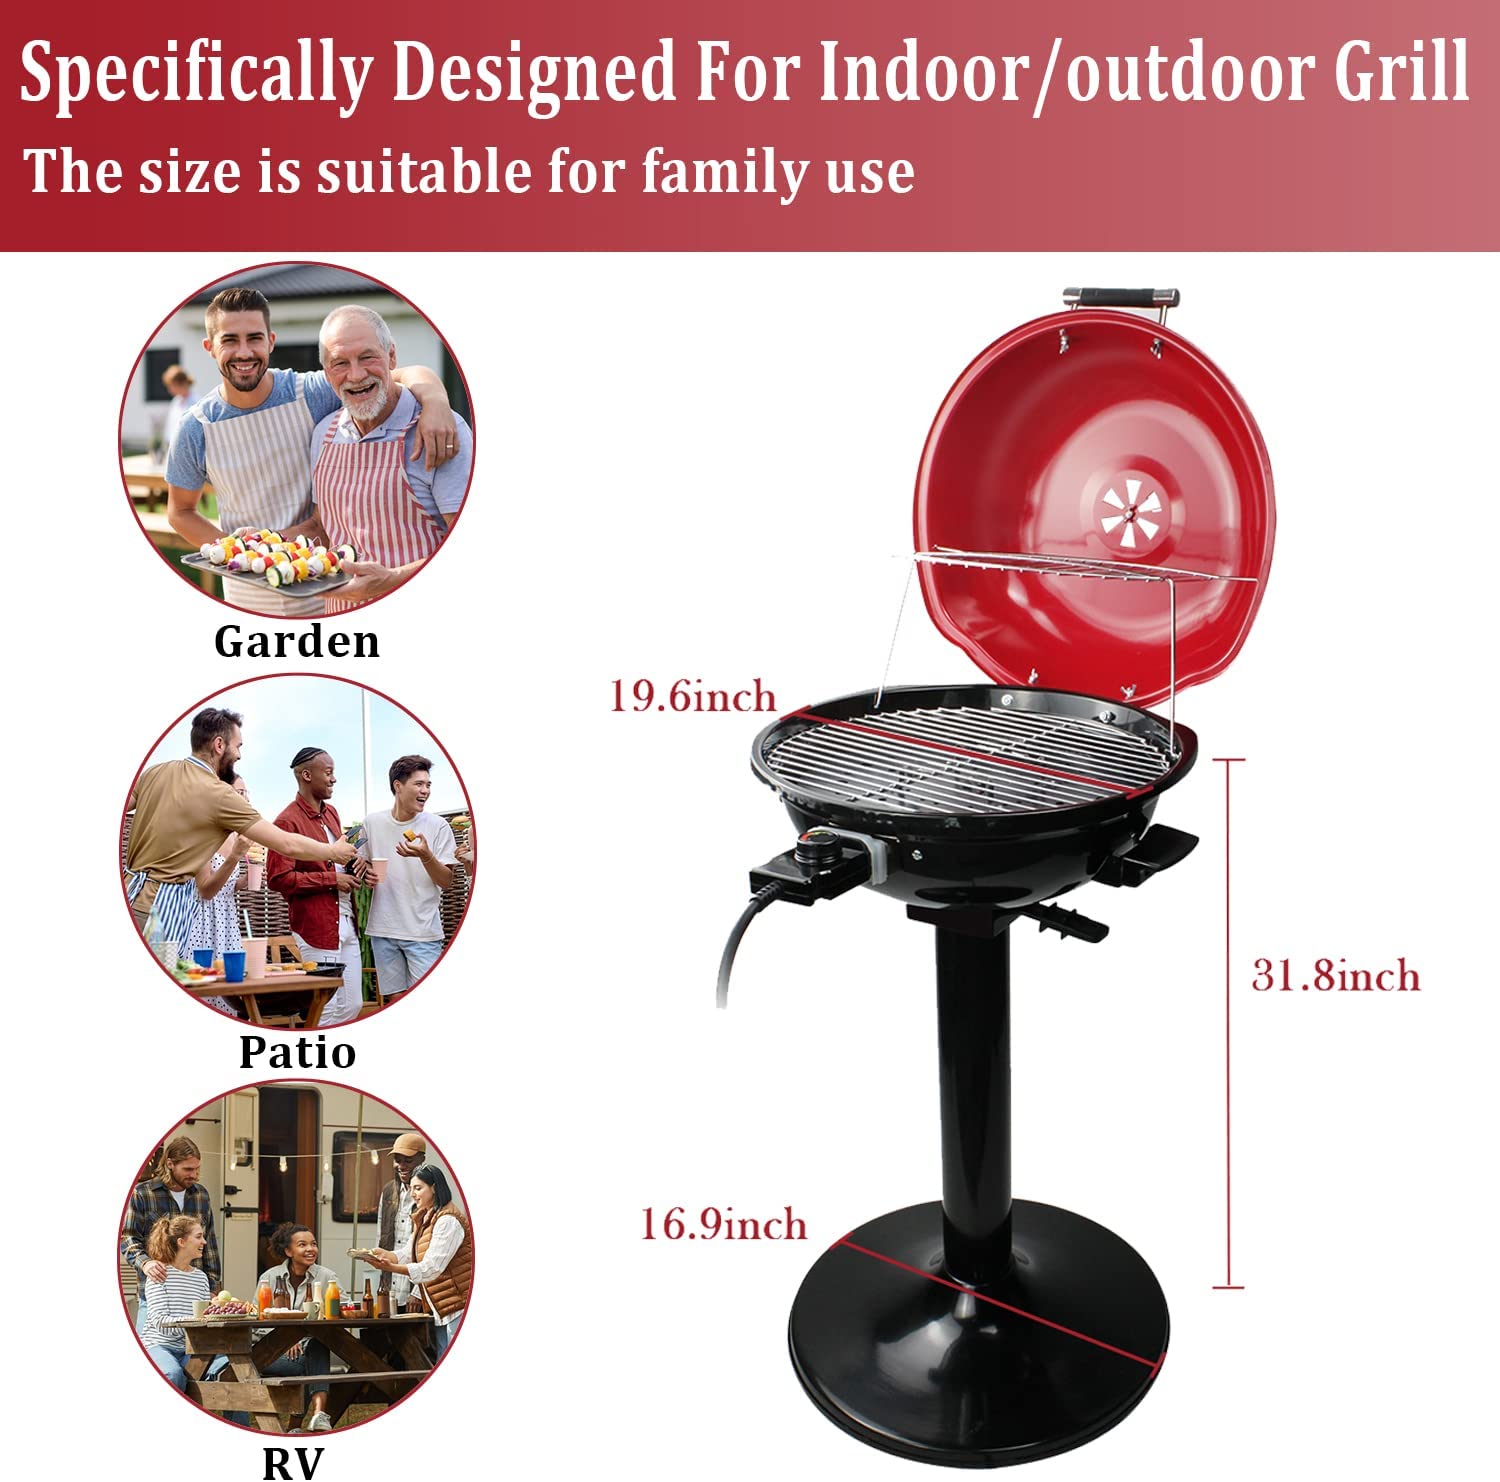 https://bigbigmart.com/wp-content/uploads/2023/06/Electric-BBQ-Grill-Techwood-15-Serving-Indoor-Outdoor-Electric-Grill-for-Indoor-Outdoor-Use-Double-Layer-Design-Portable-Removable-Stand-Grill-1600W-Stand-Red-BBQ-Grills4.jpg